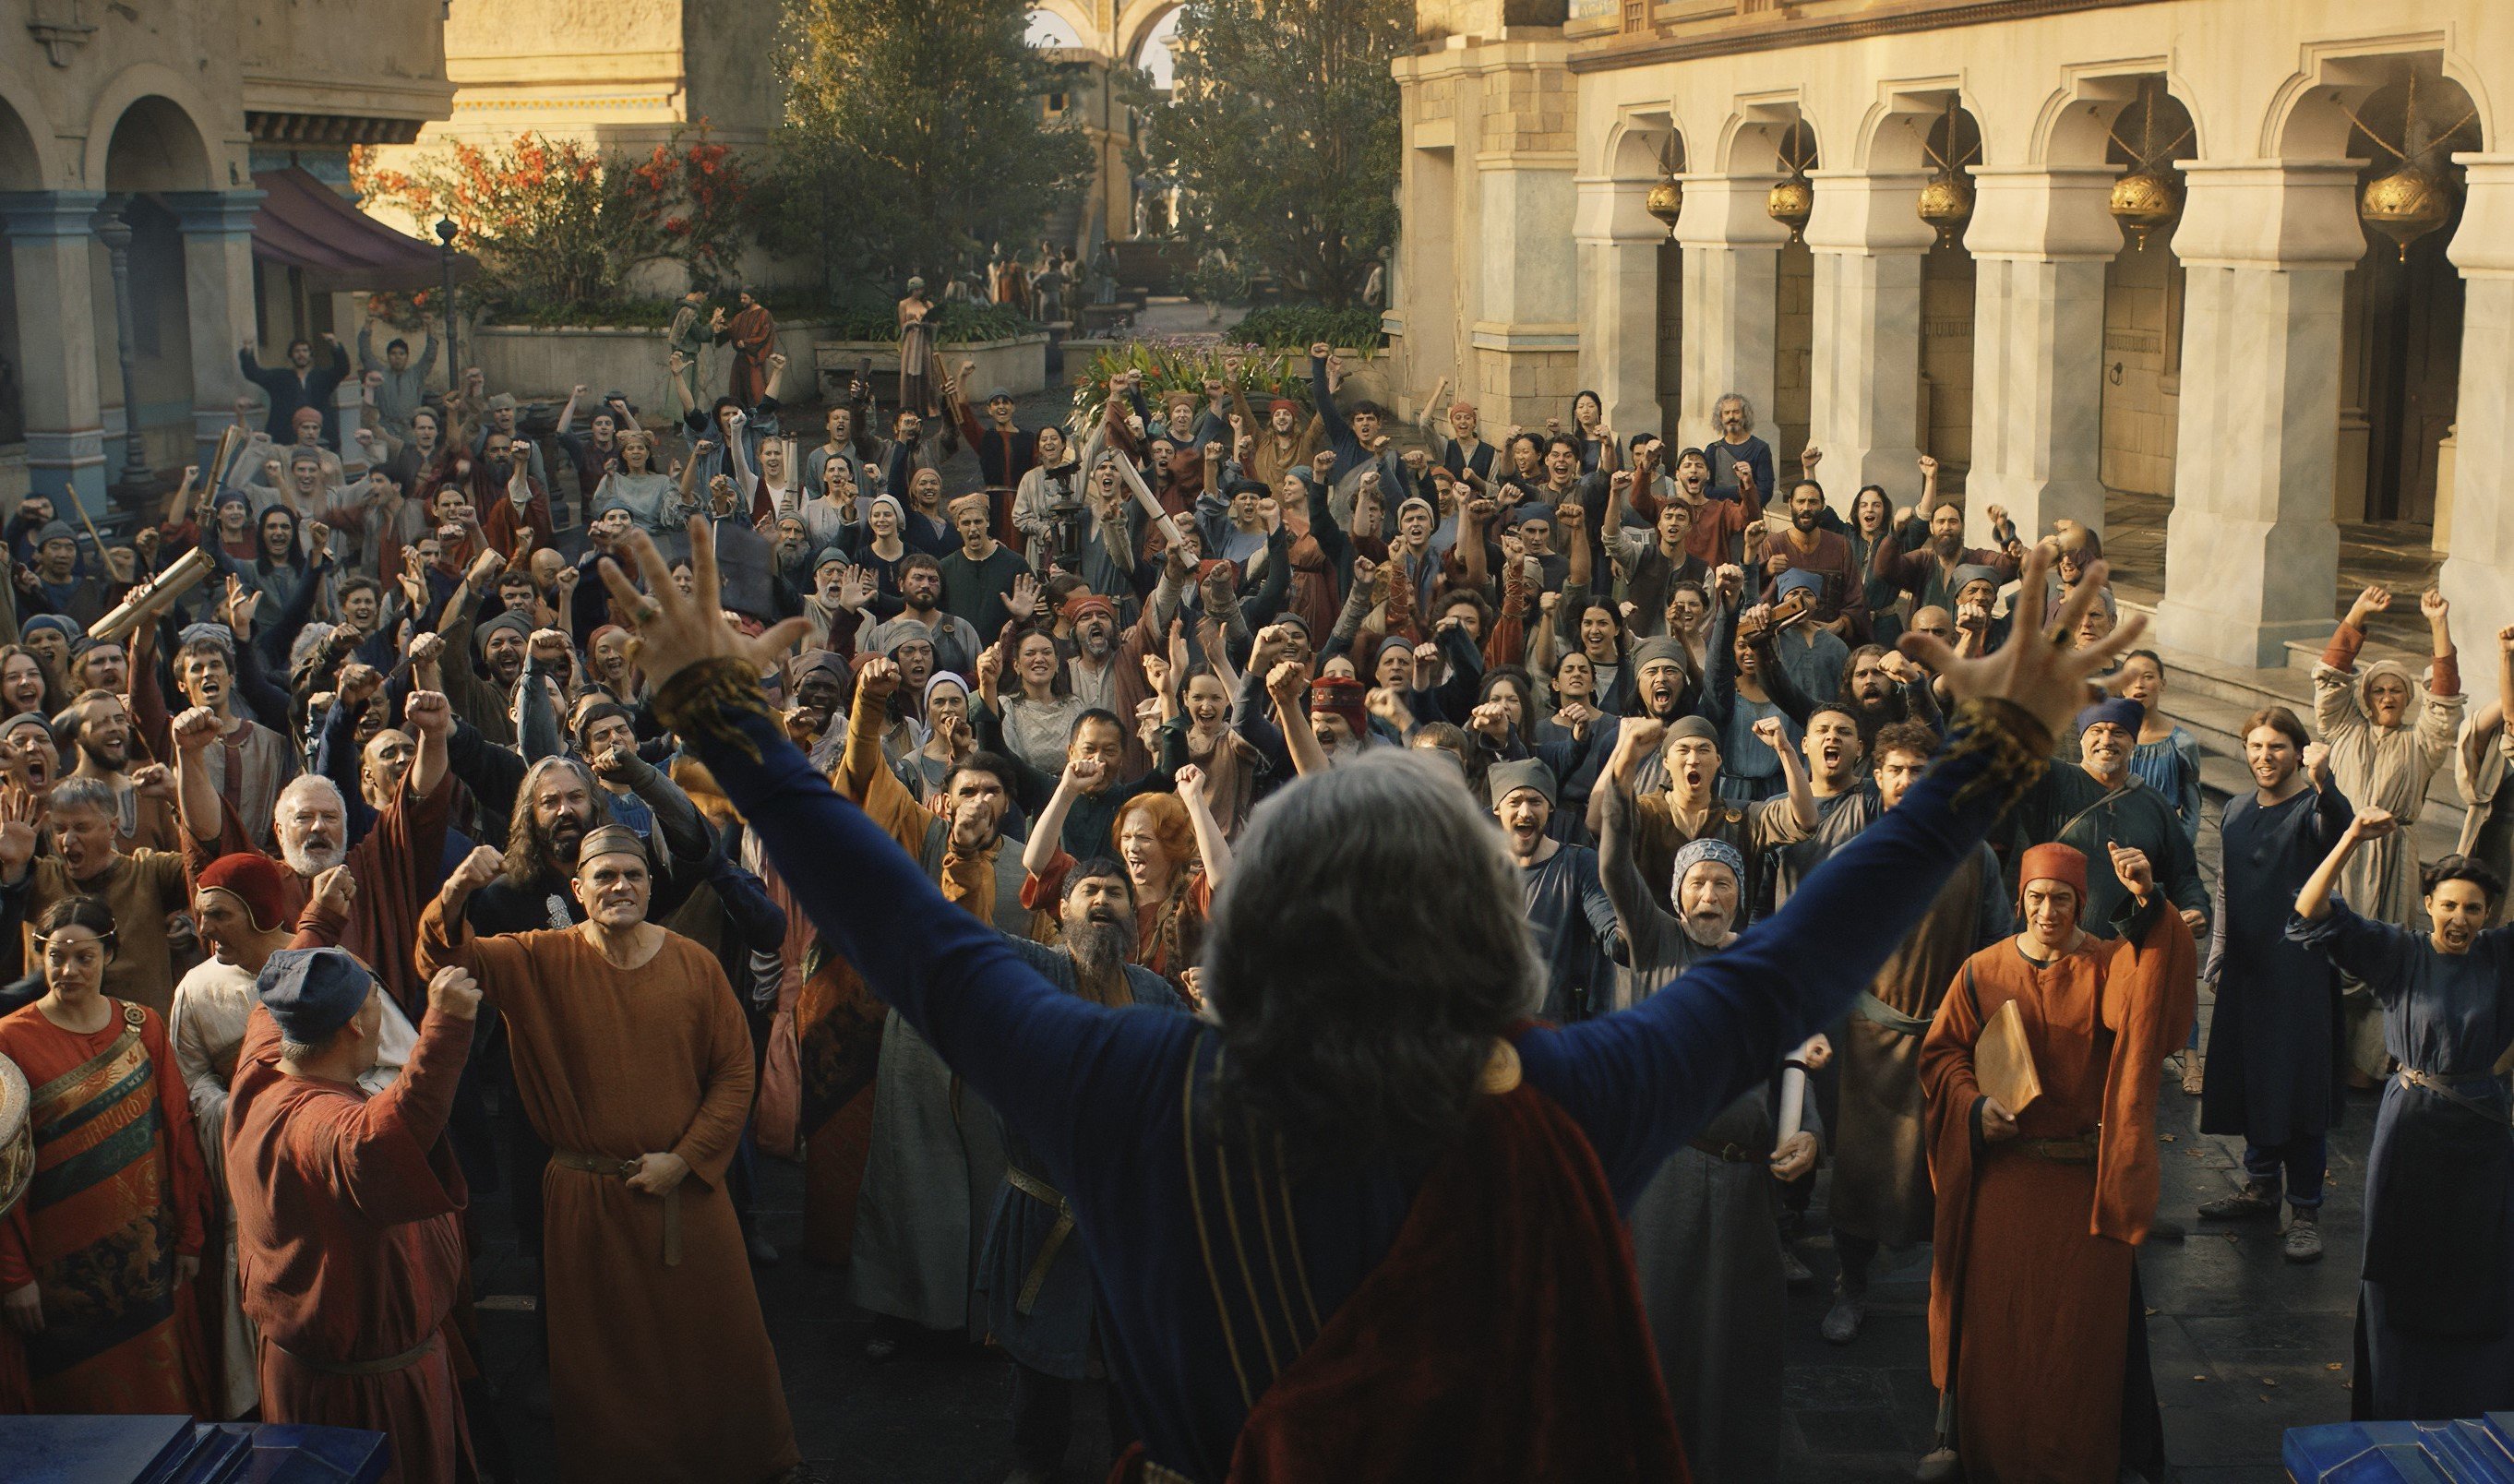 An image from 'The Lord of the Rings: The Rings of Power,' which is not adapting a single book. The image shows a man standing in front of a crowd and raising his arms.